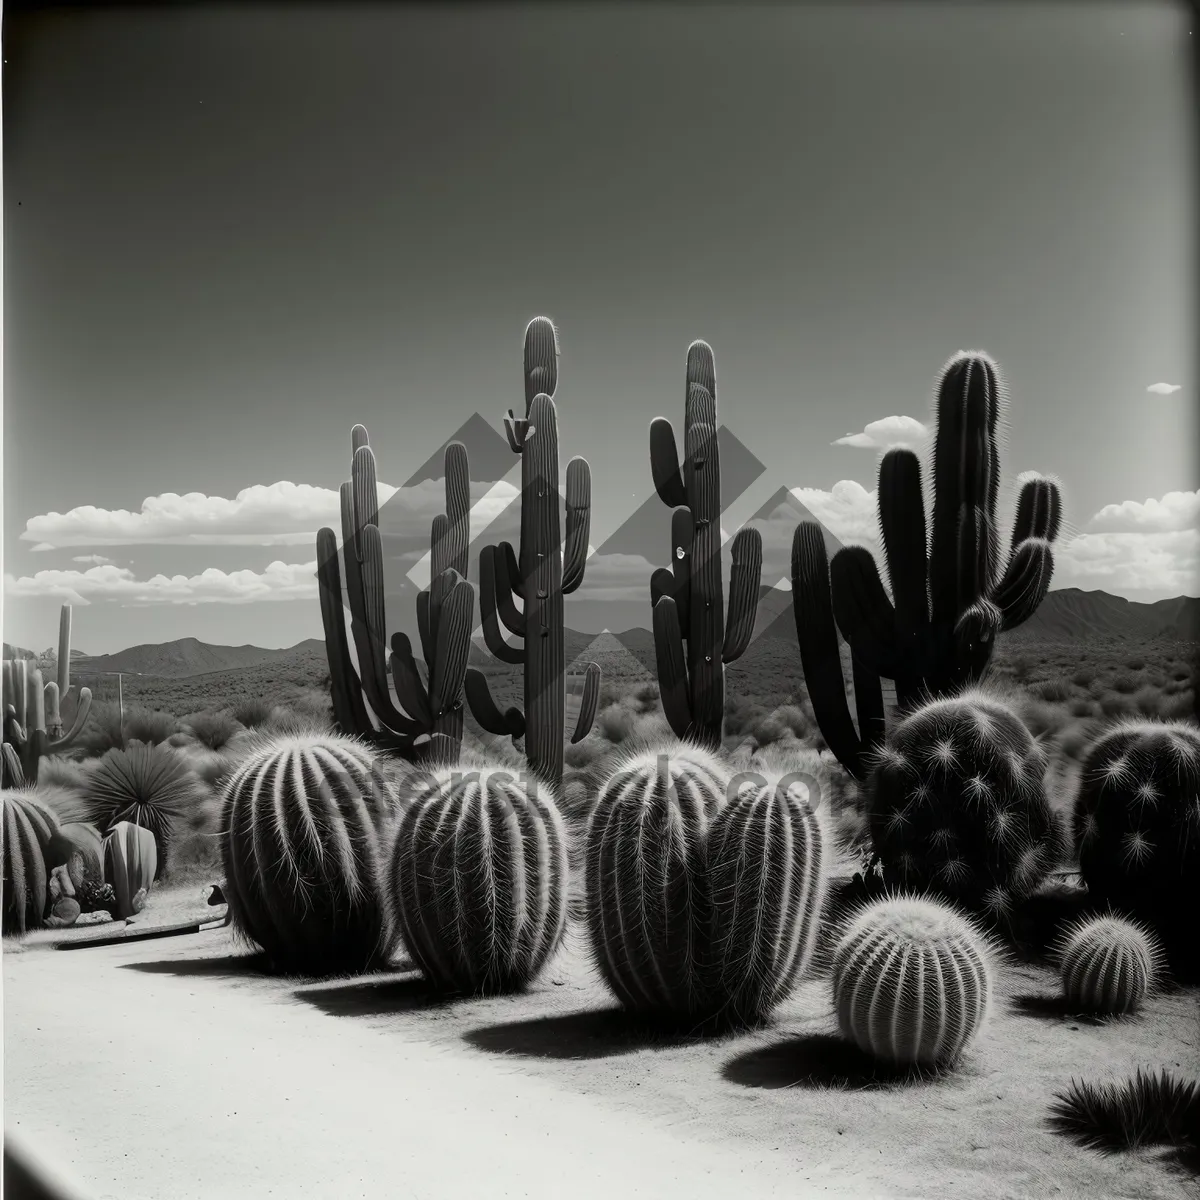 Picture of Dumbbell Weight Sports Equipment with Cactus